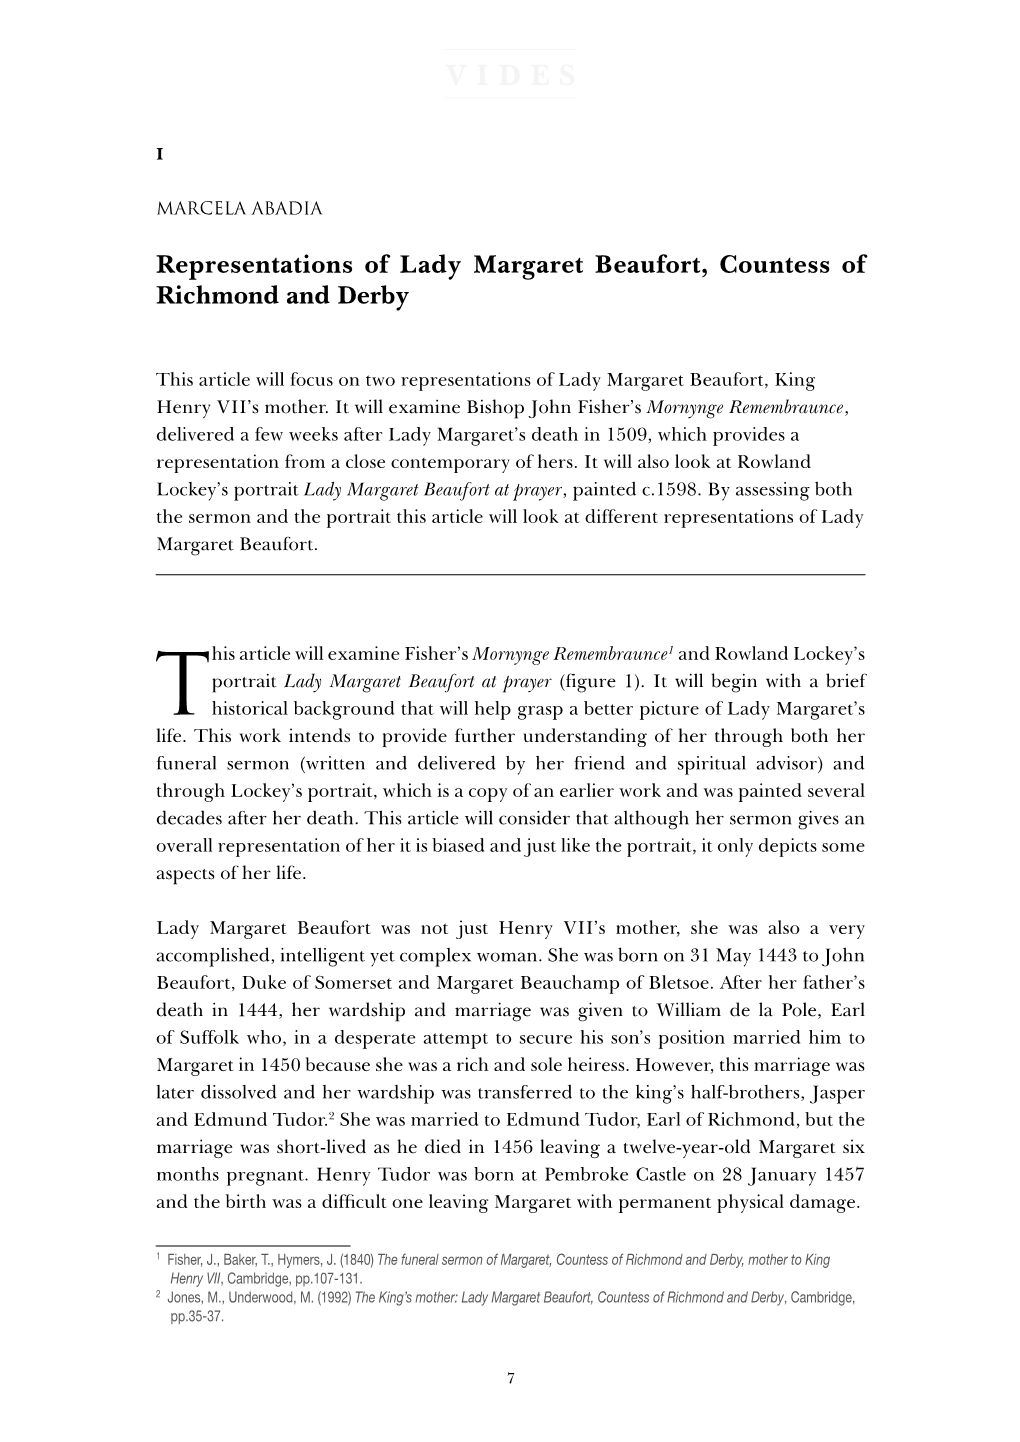 Representations of Lady Margaret Beaufort, Countess of Richmond and Derby